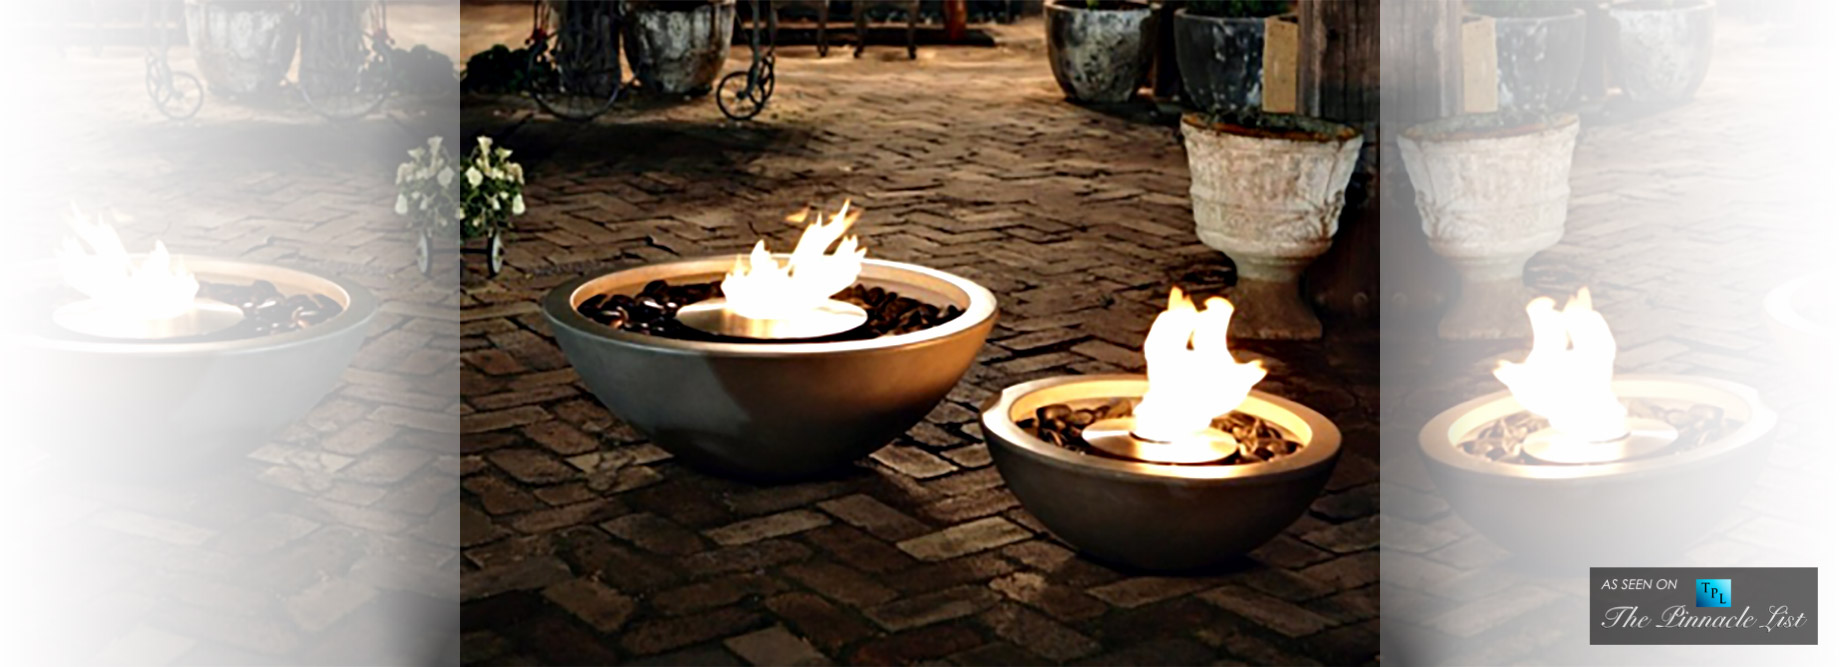 Fire It Up - Outdoor Luxury Living with Furniture for Australian Winter Entertaining